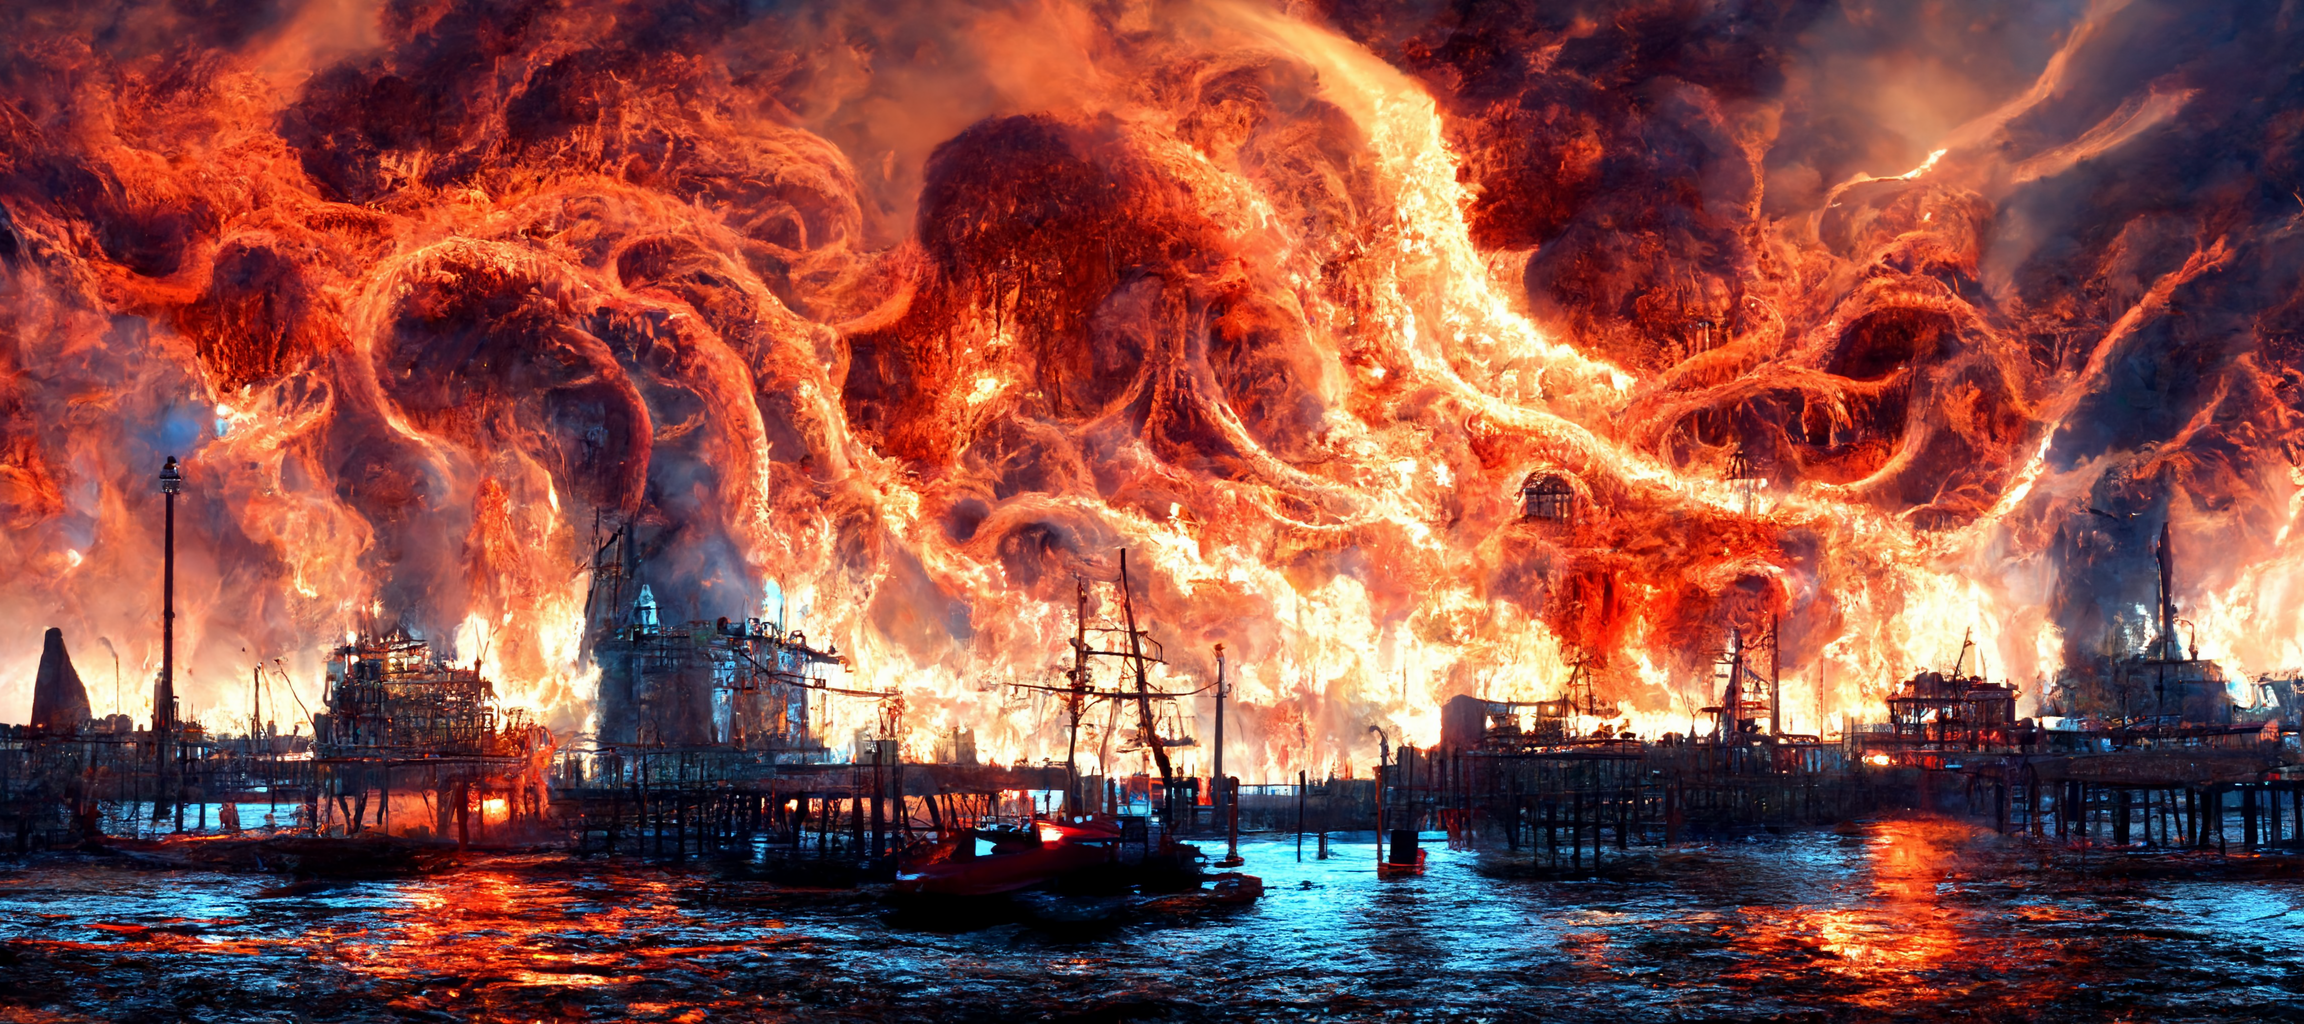 vibe_maunsell_forts_in_London_Thames_on_fire_being_attacked_by__f99c6601-5b97-4dee-8205-21b36ad8d843